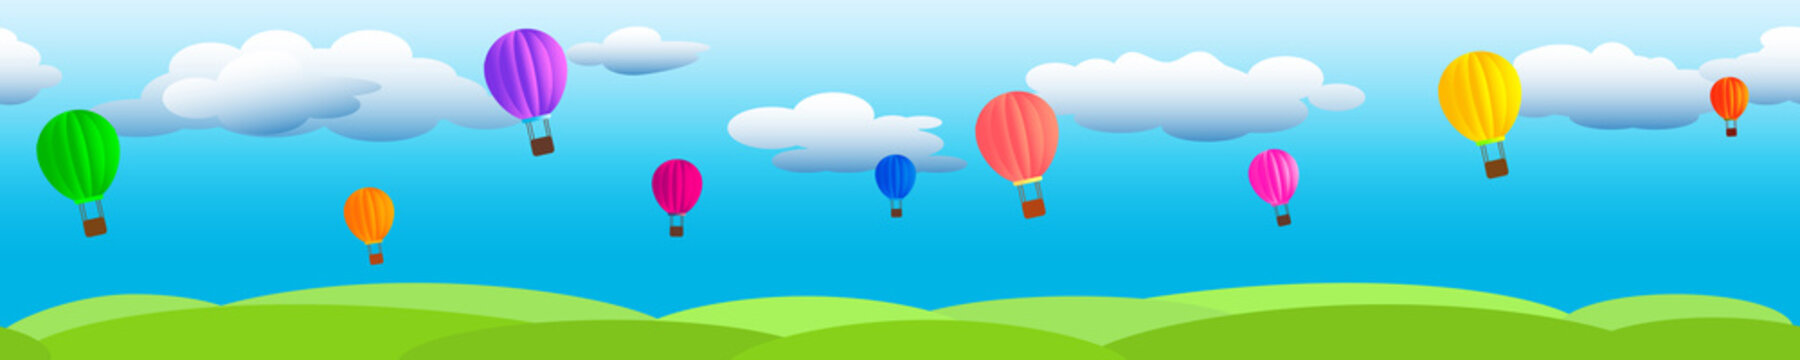 Clouds on a blue sky with flying balloons and green grass. Seamless color flat vector image.